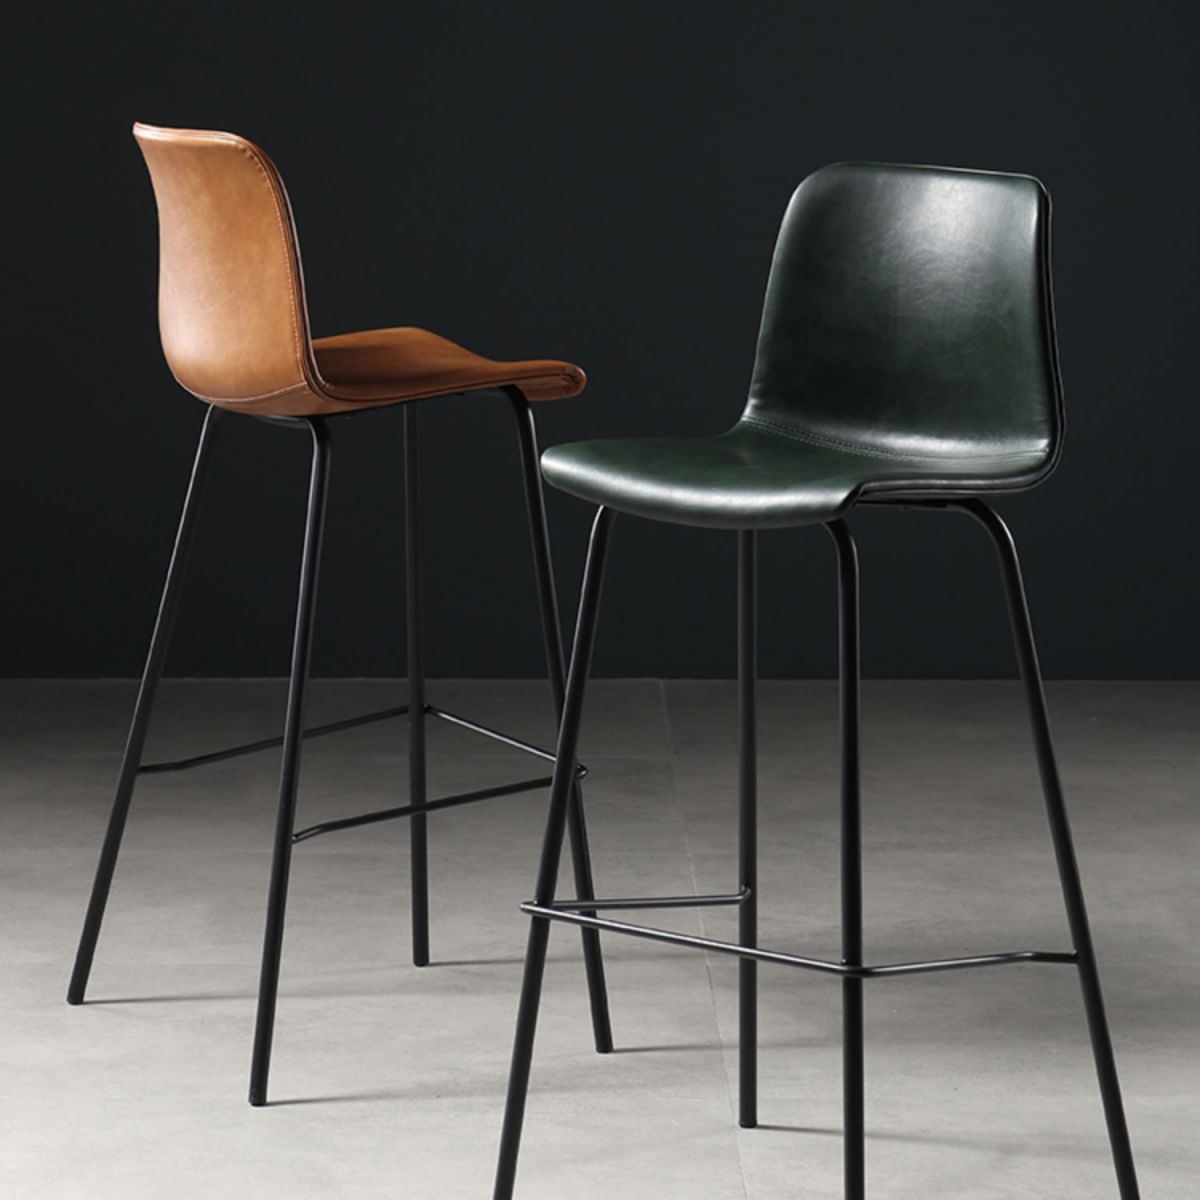 Glossy Leather Square Bar Stool Industrial Metal Stools with Back Legs